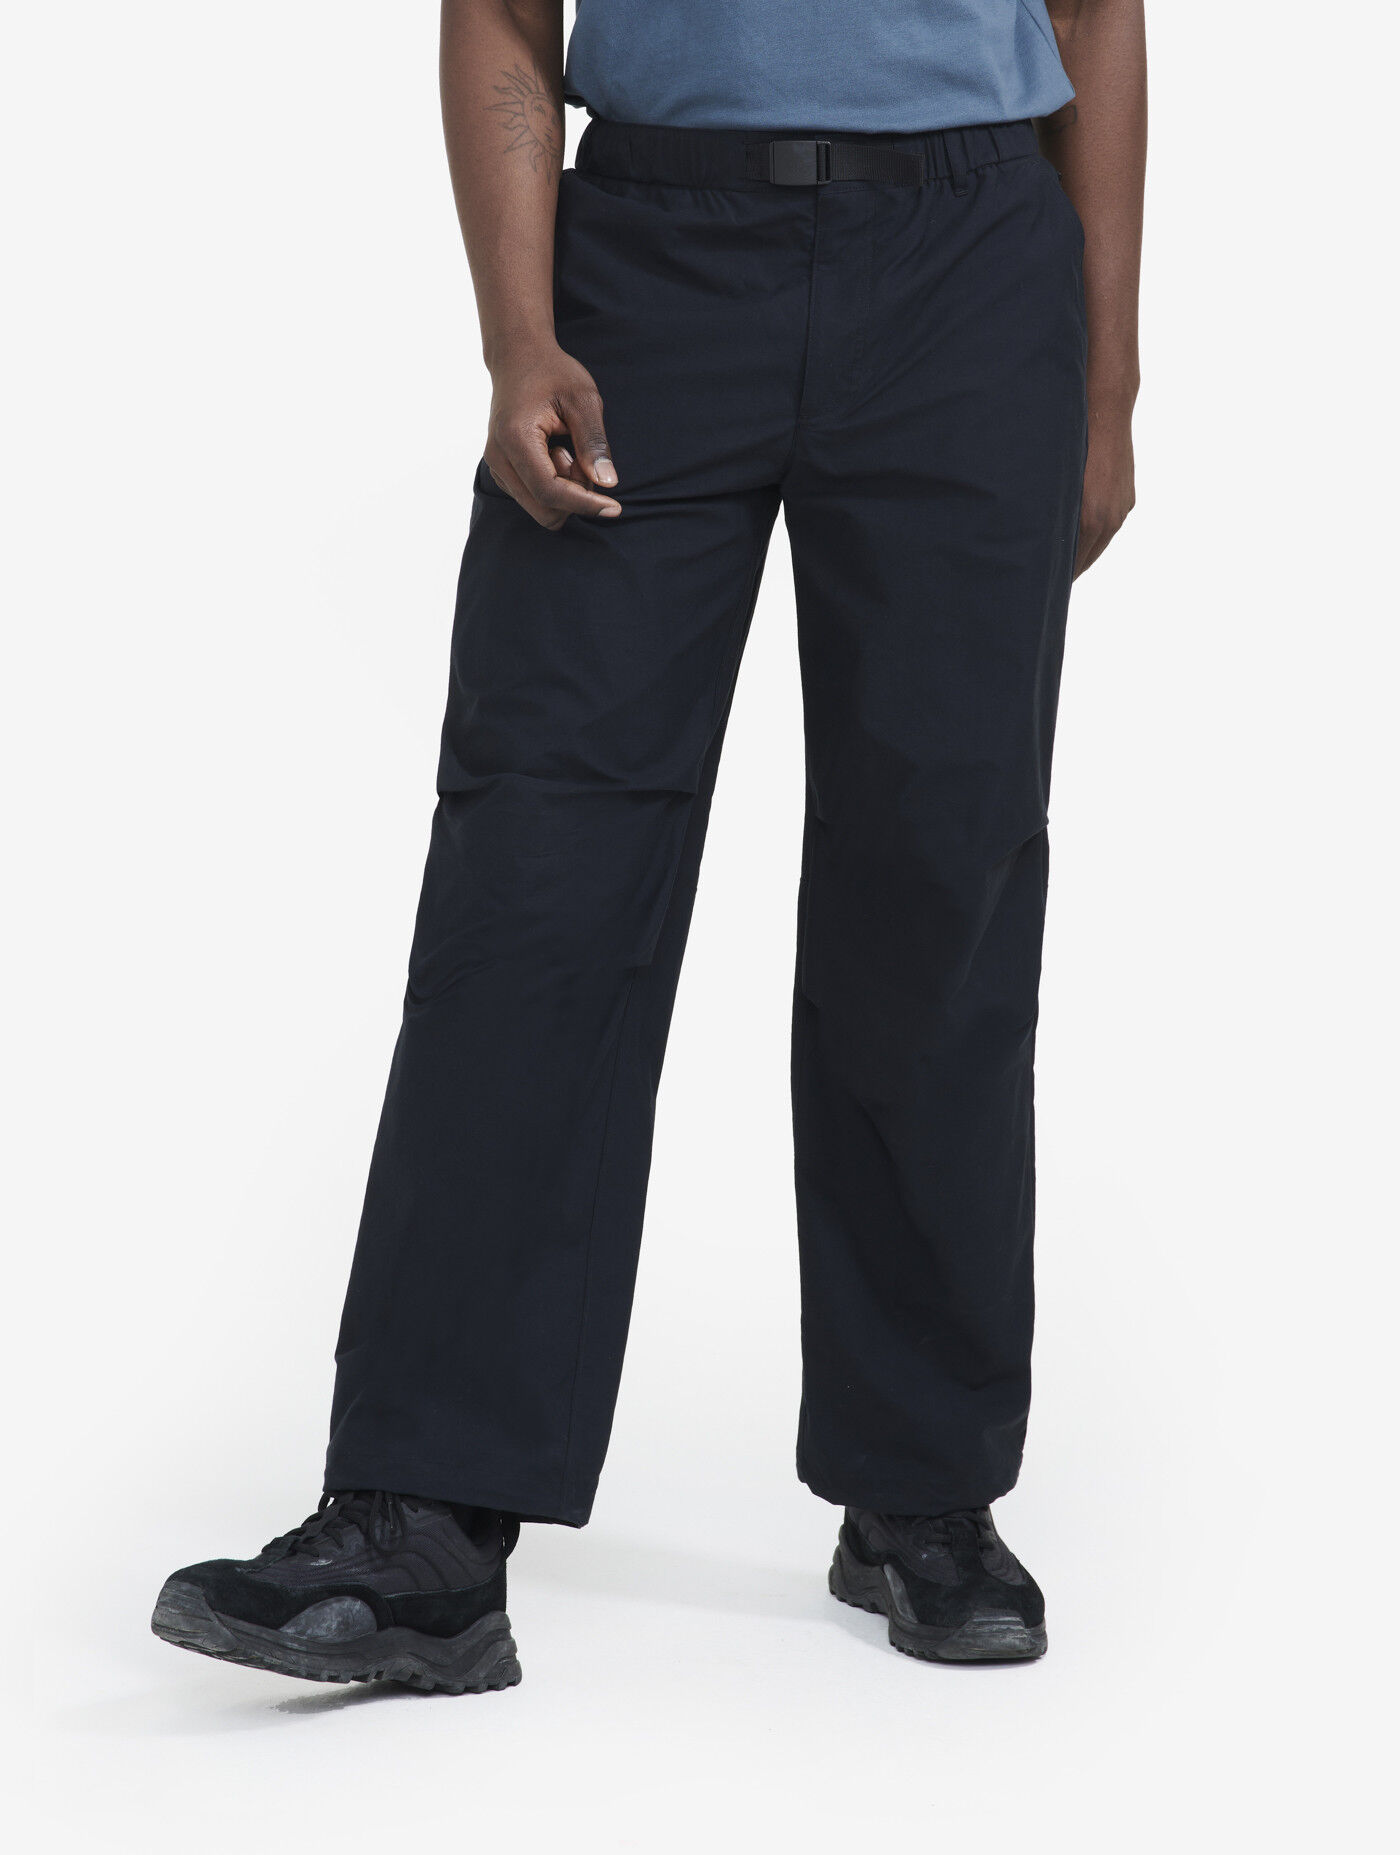 Aigle DFT® and UV-C® pants with elasticated waist and integrated belt - Trousers - Men's | Hardloop